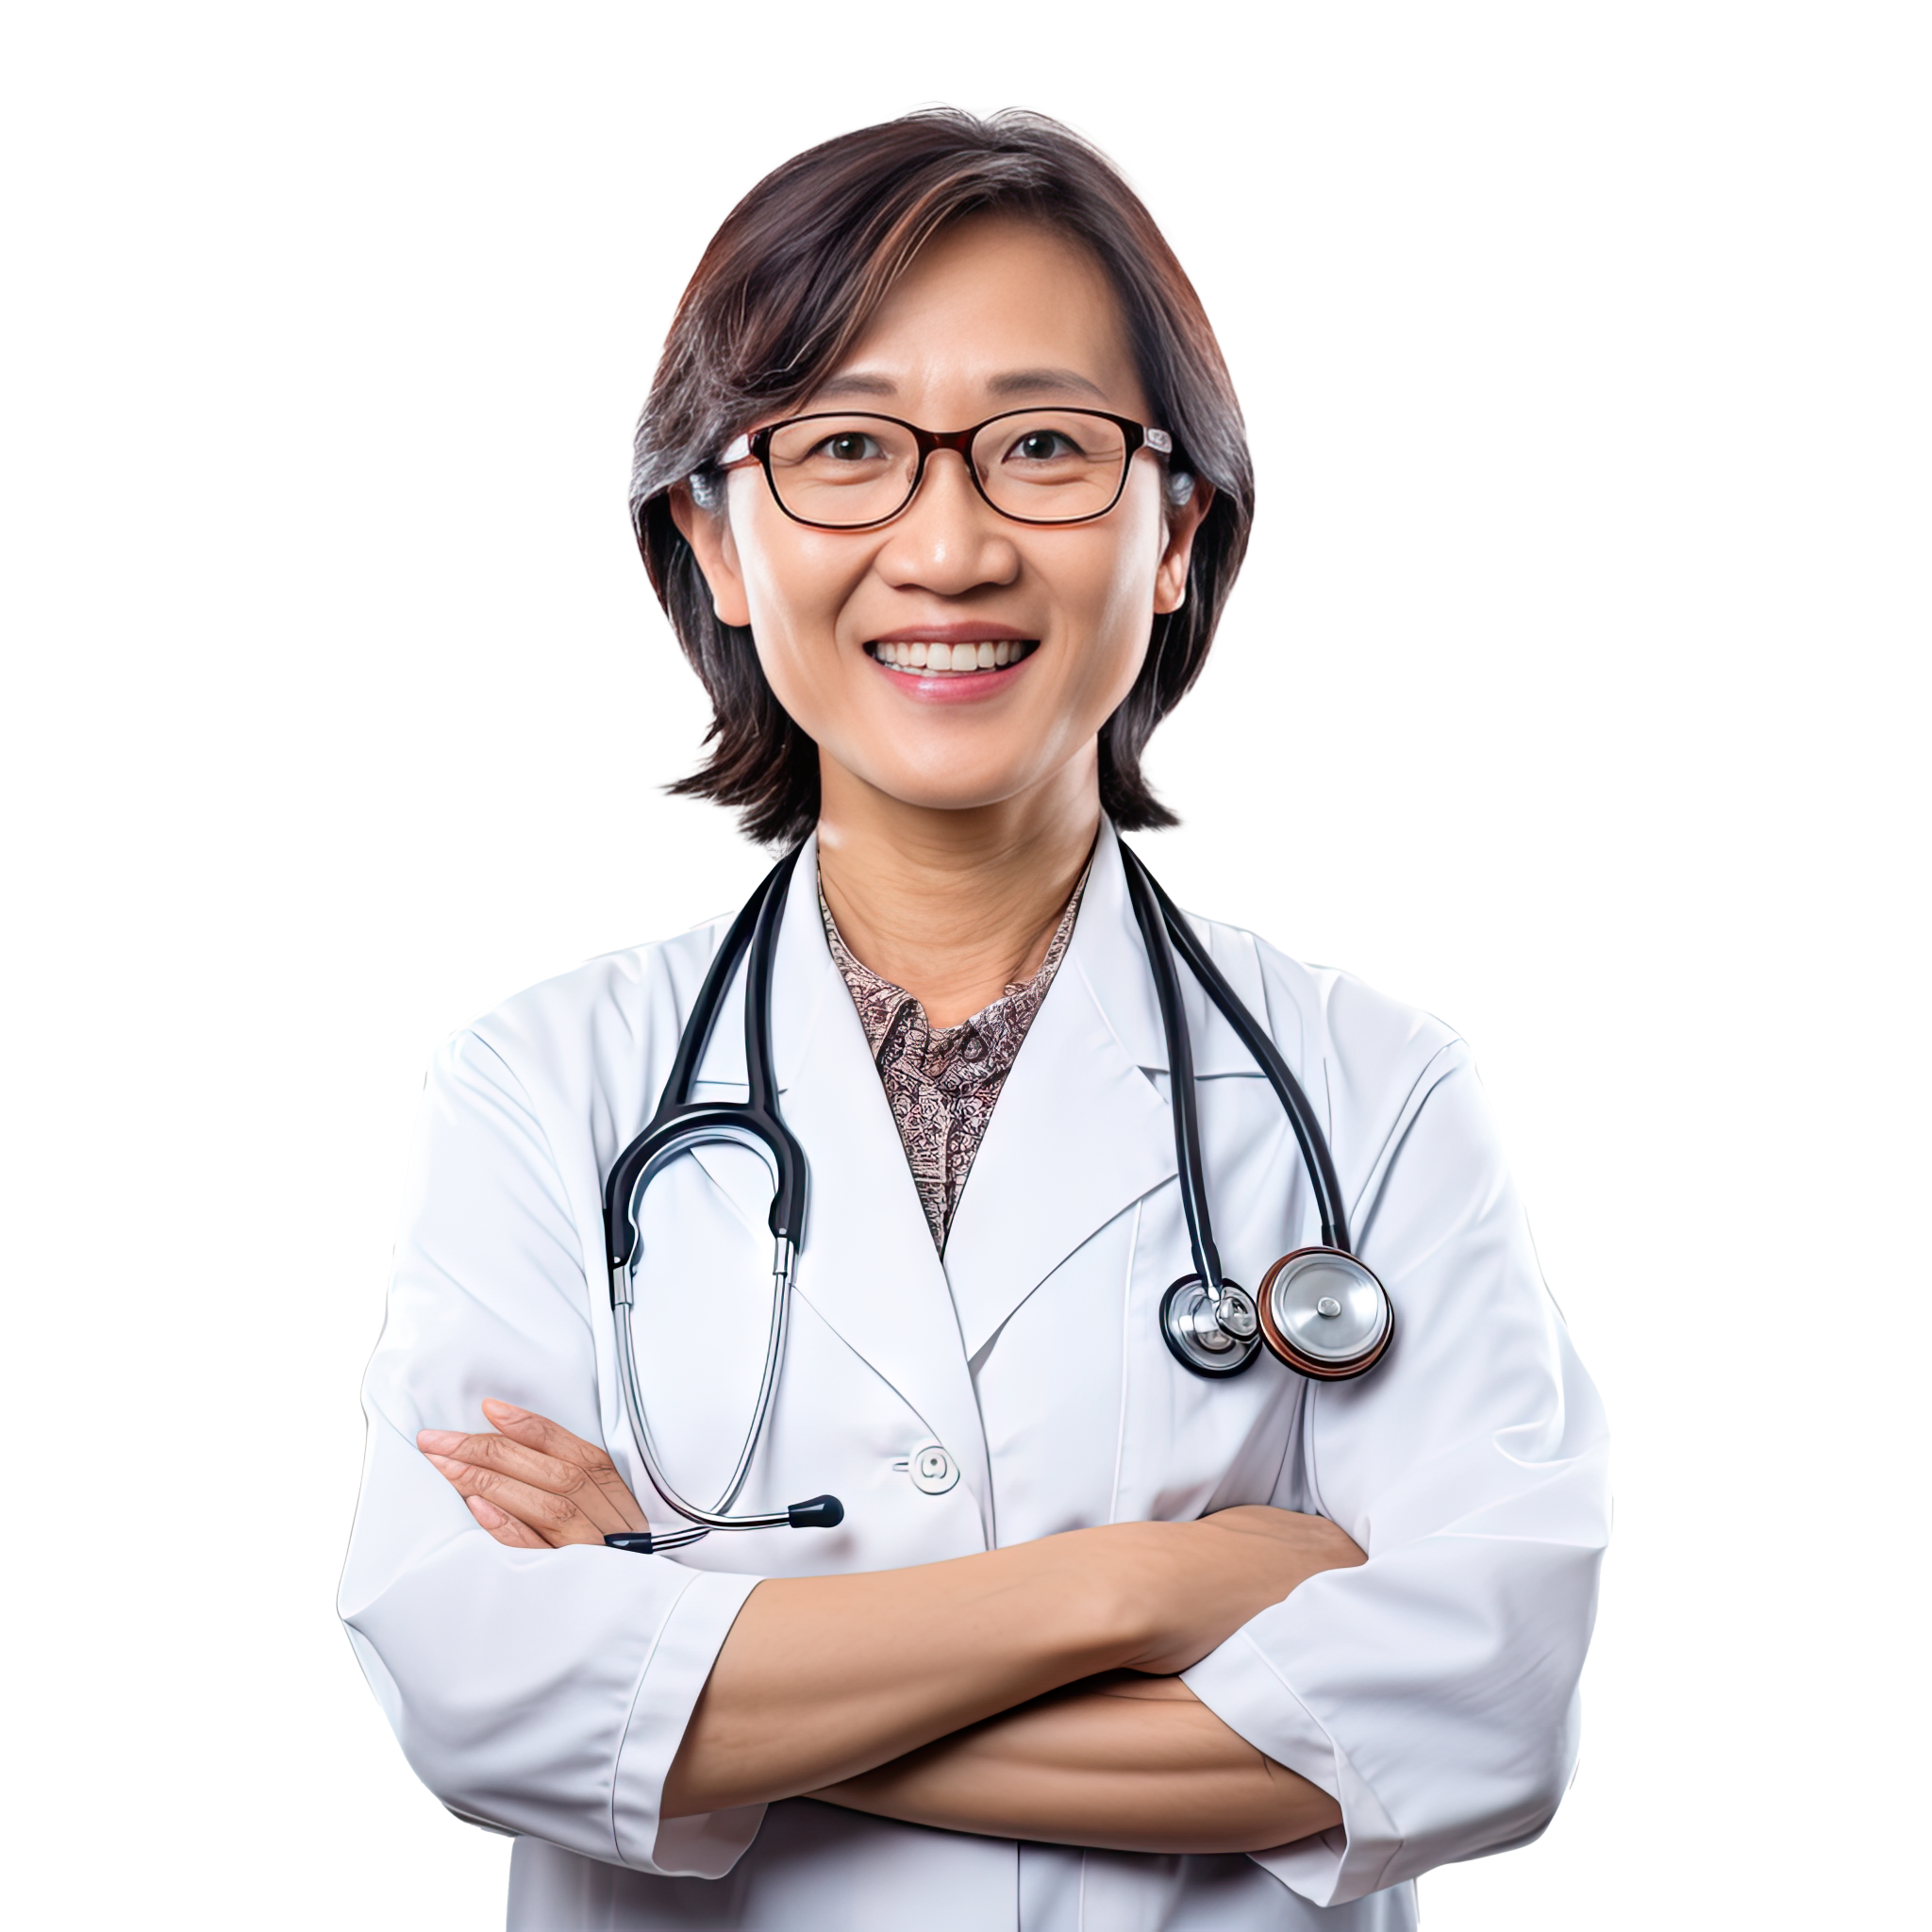 Medical doctor wearing stethoscope